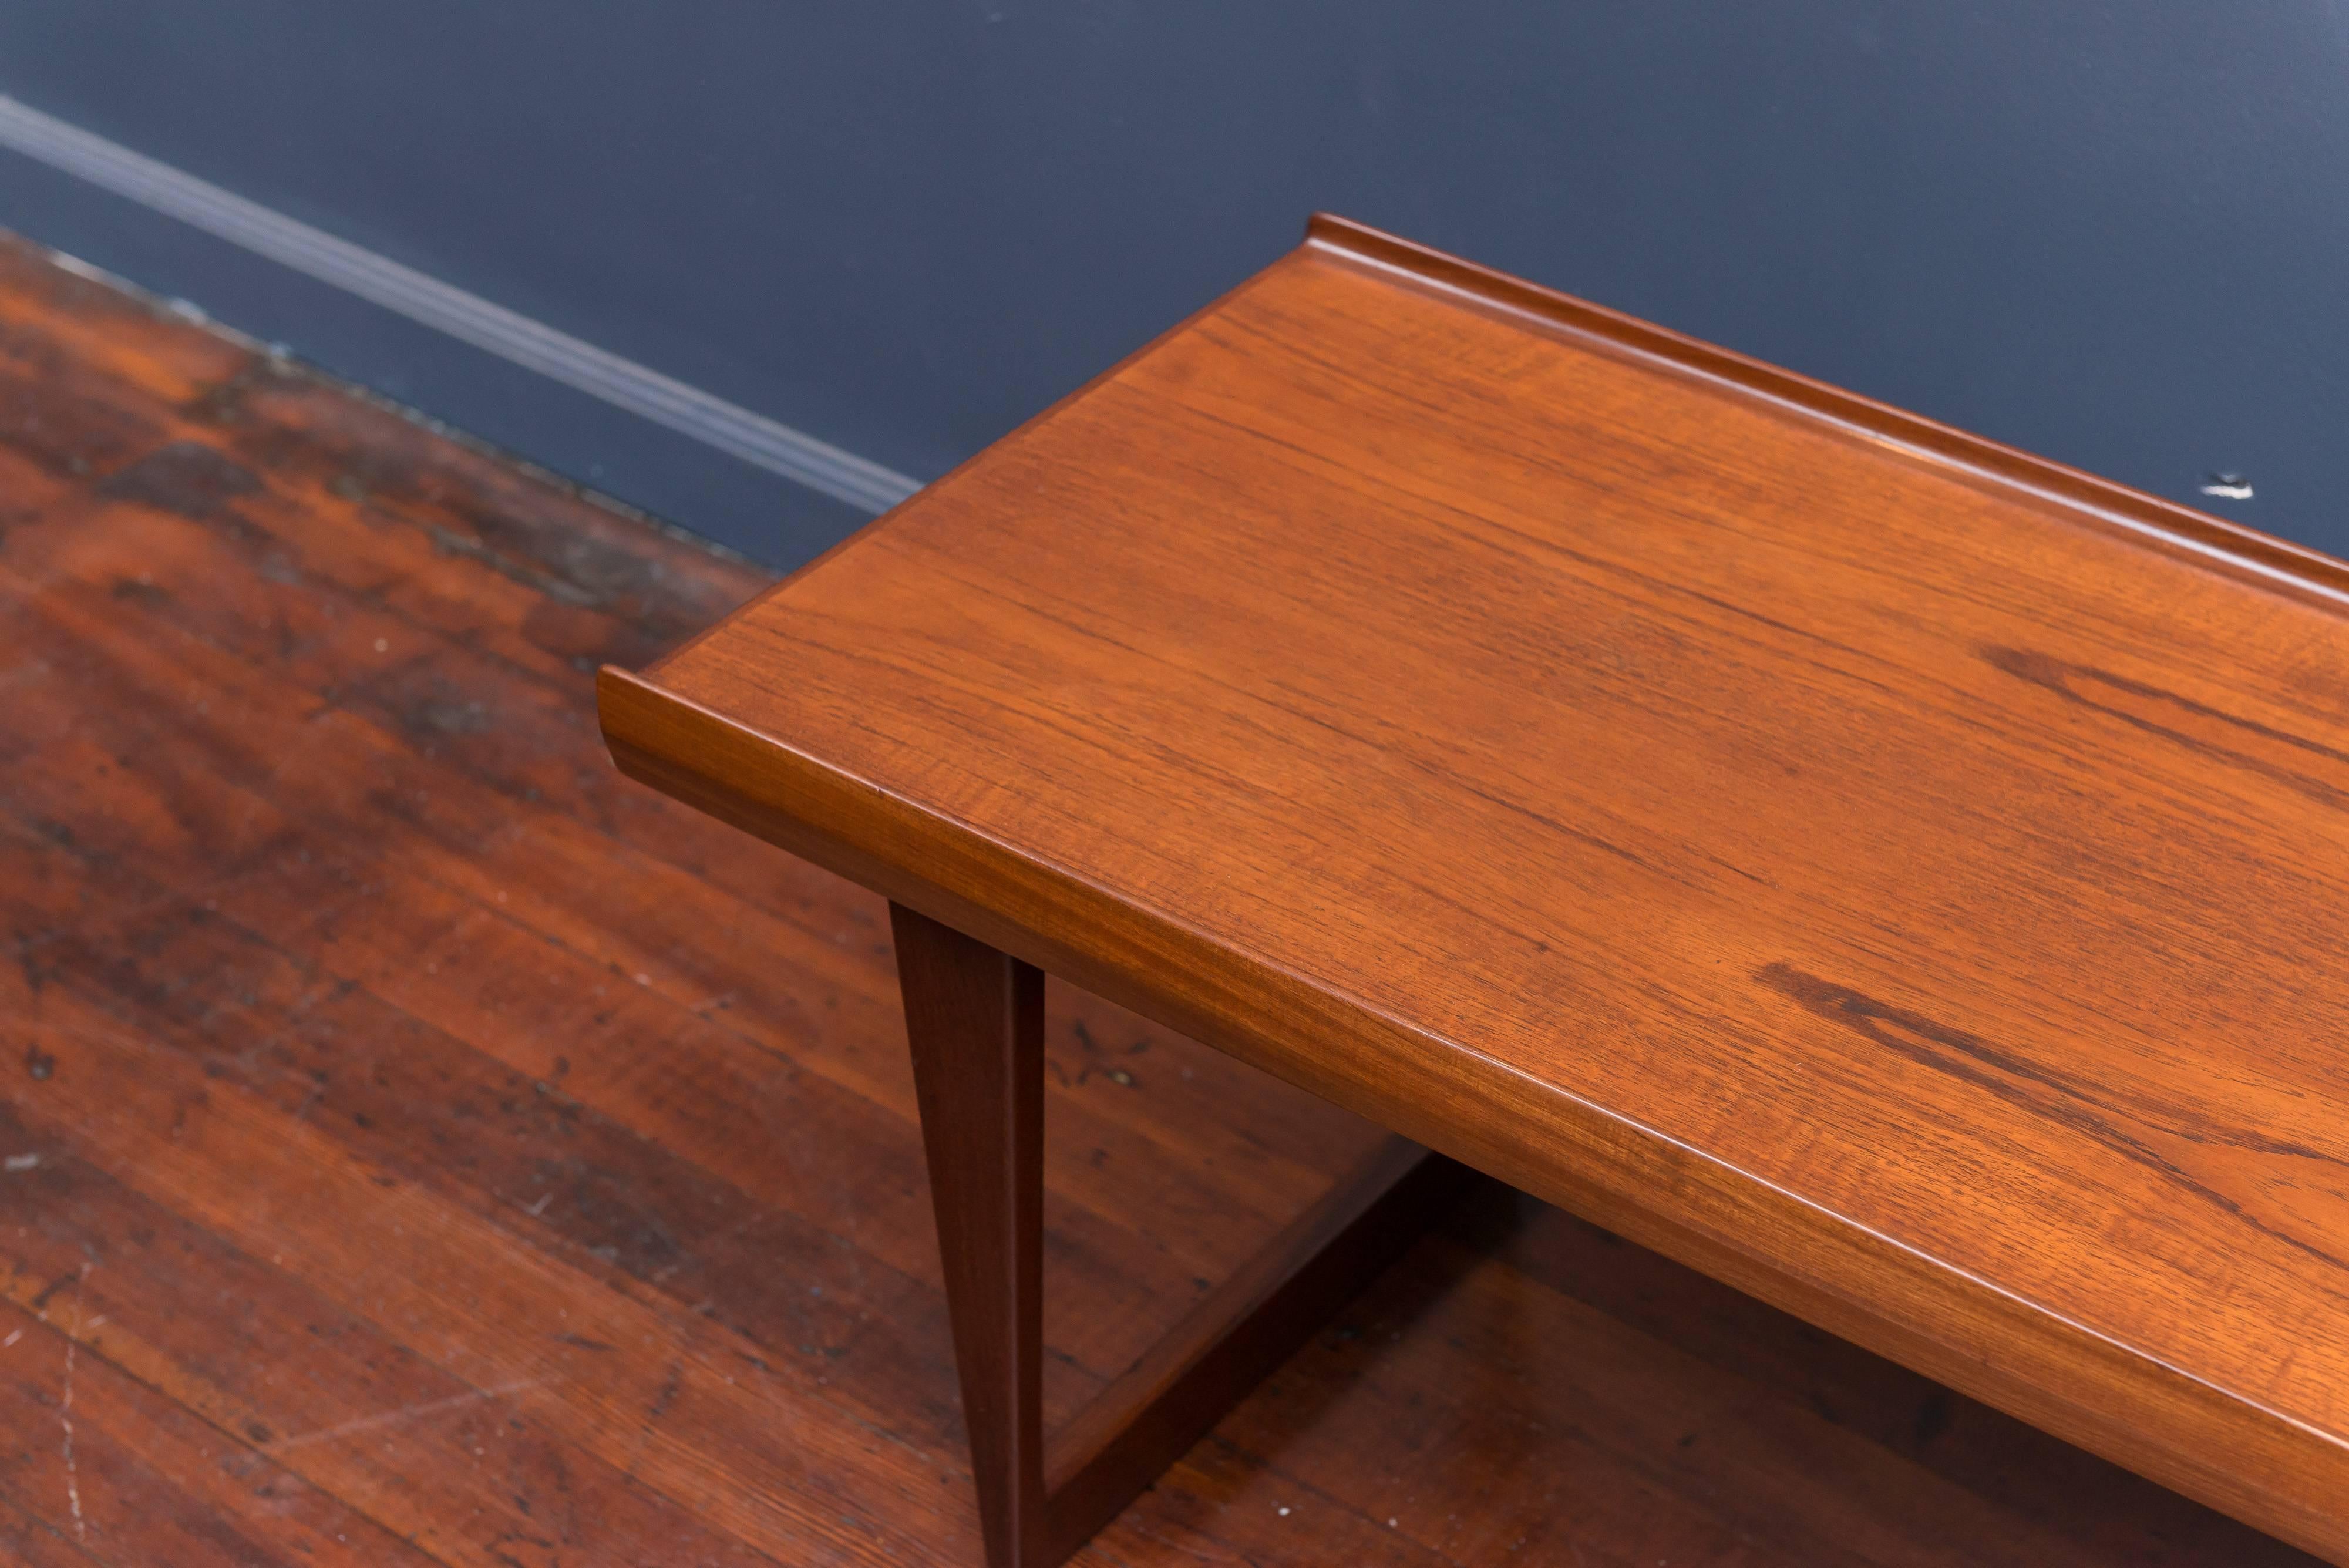 Danish Modern rosewood coffee table by Lovig, Denmark. Newly refinished in perfect condition, labeled.